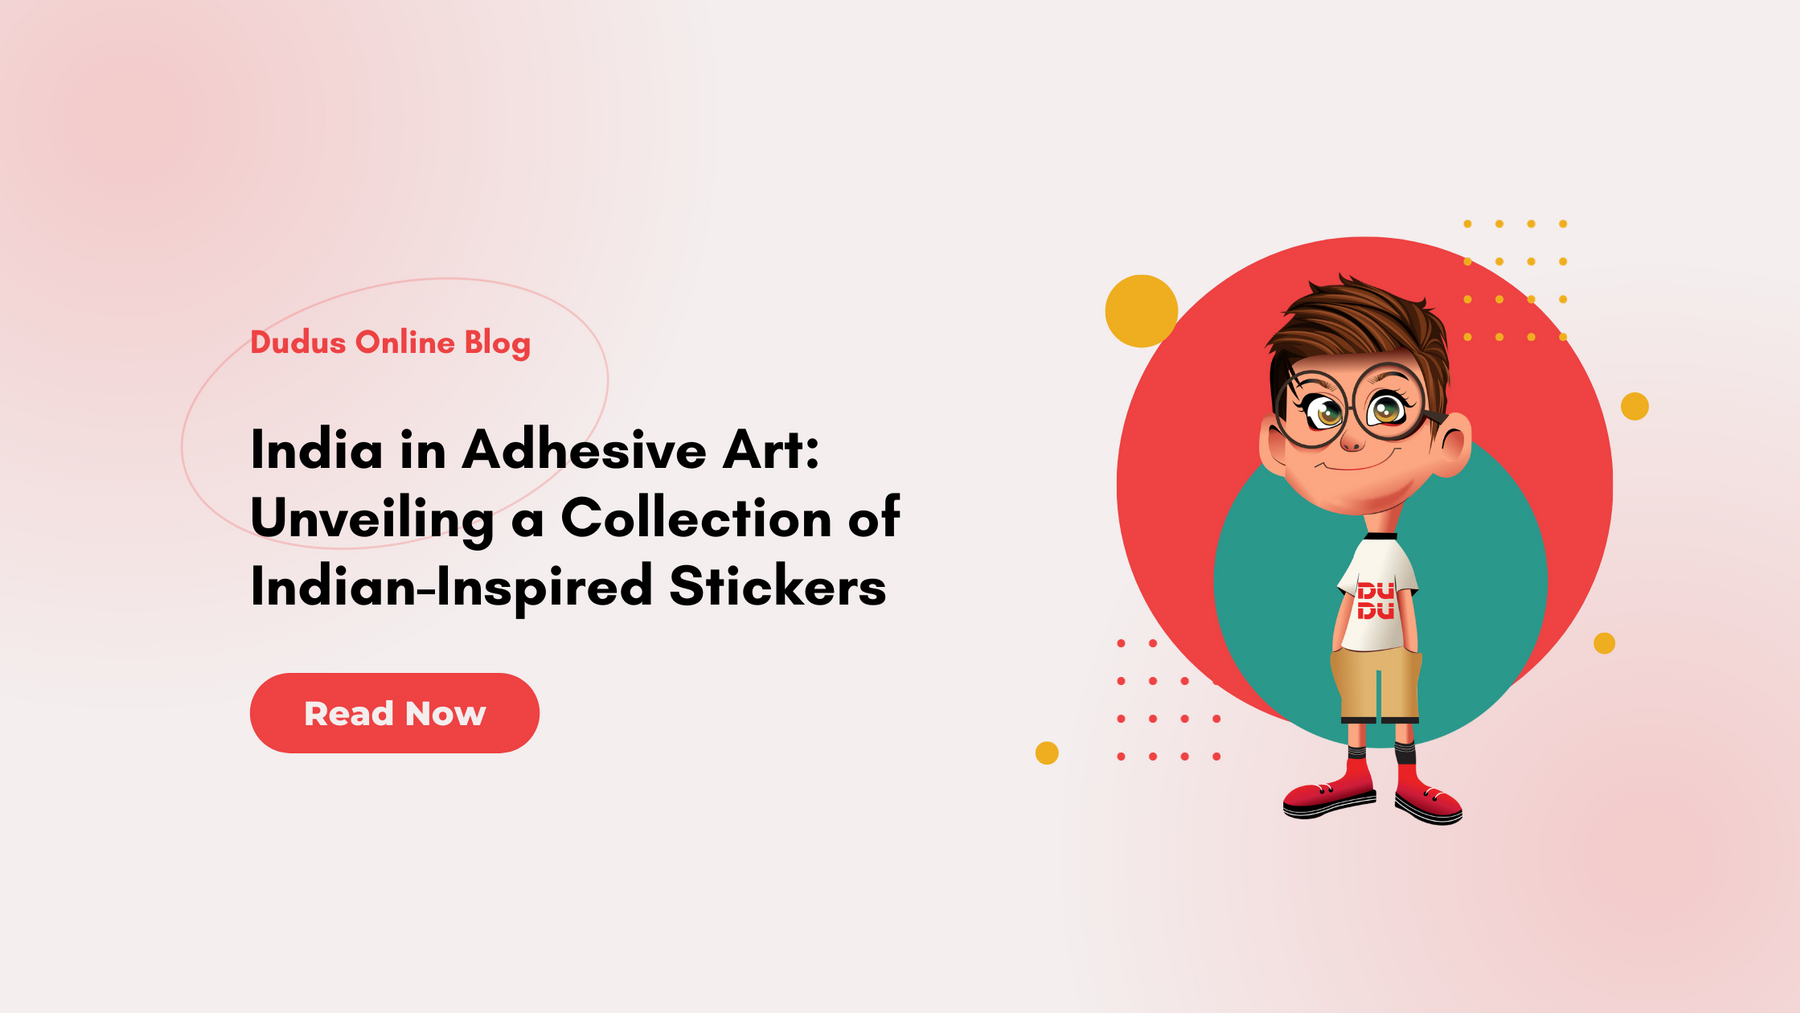 India in Adhesive Art: Unveiling a Collection of Indian-Inspired Stickers